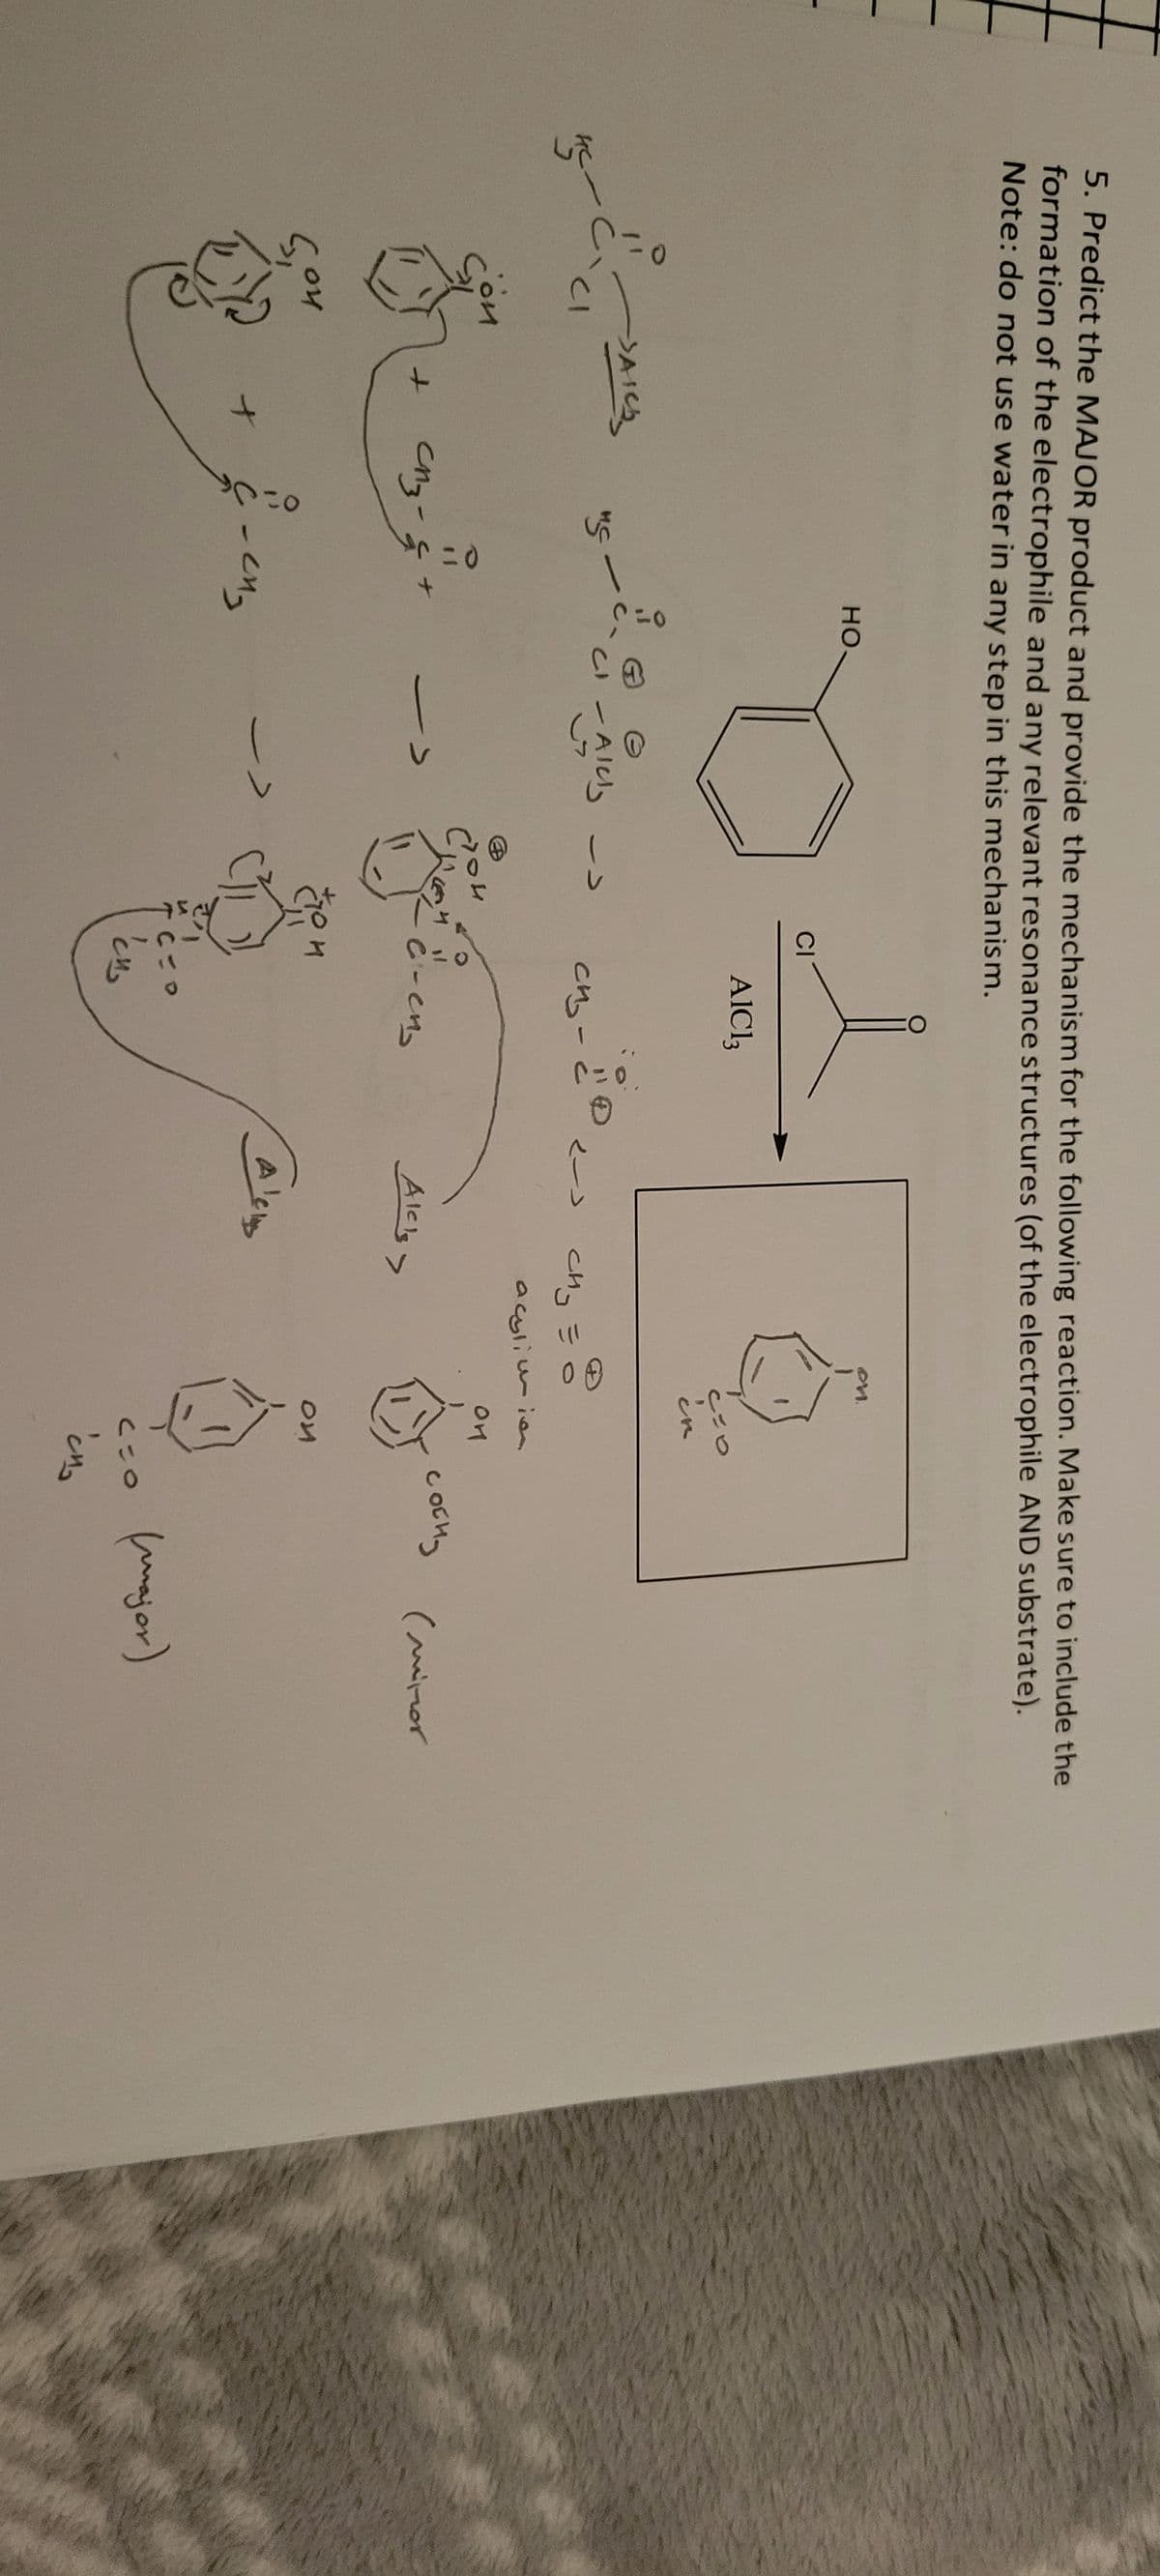 5. Predict the MAJOR product and provide the mechanism for the following reaction. Make sure to include the
formation of the electrophile and any relevant resonance structures (of the electrophile AND substrate).
Note: do not use water in any step in this mechanism.
HC-
CI
ои
G,Ou
затв
MS
сиз-
-
но,
2n₂
CI
و
-Alely ->
د۔
>
54
CI
AIC13
CH₂-
c-ens
CHO
cus
دے
CH3 =
د Alcs
C=O
@o
0
er
acylimien
OH
ON
сосну
CUO
C4₂
(minor
(major)